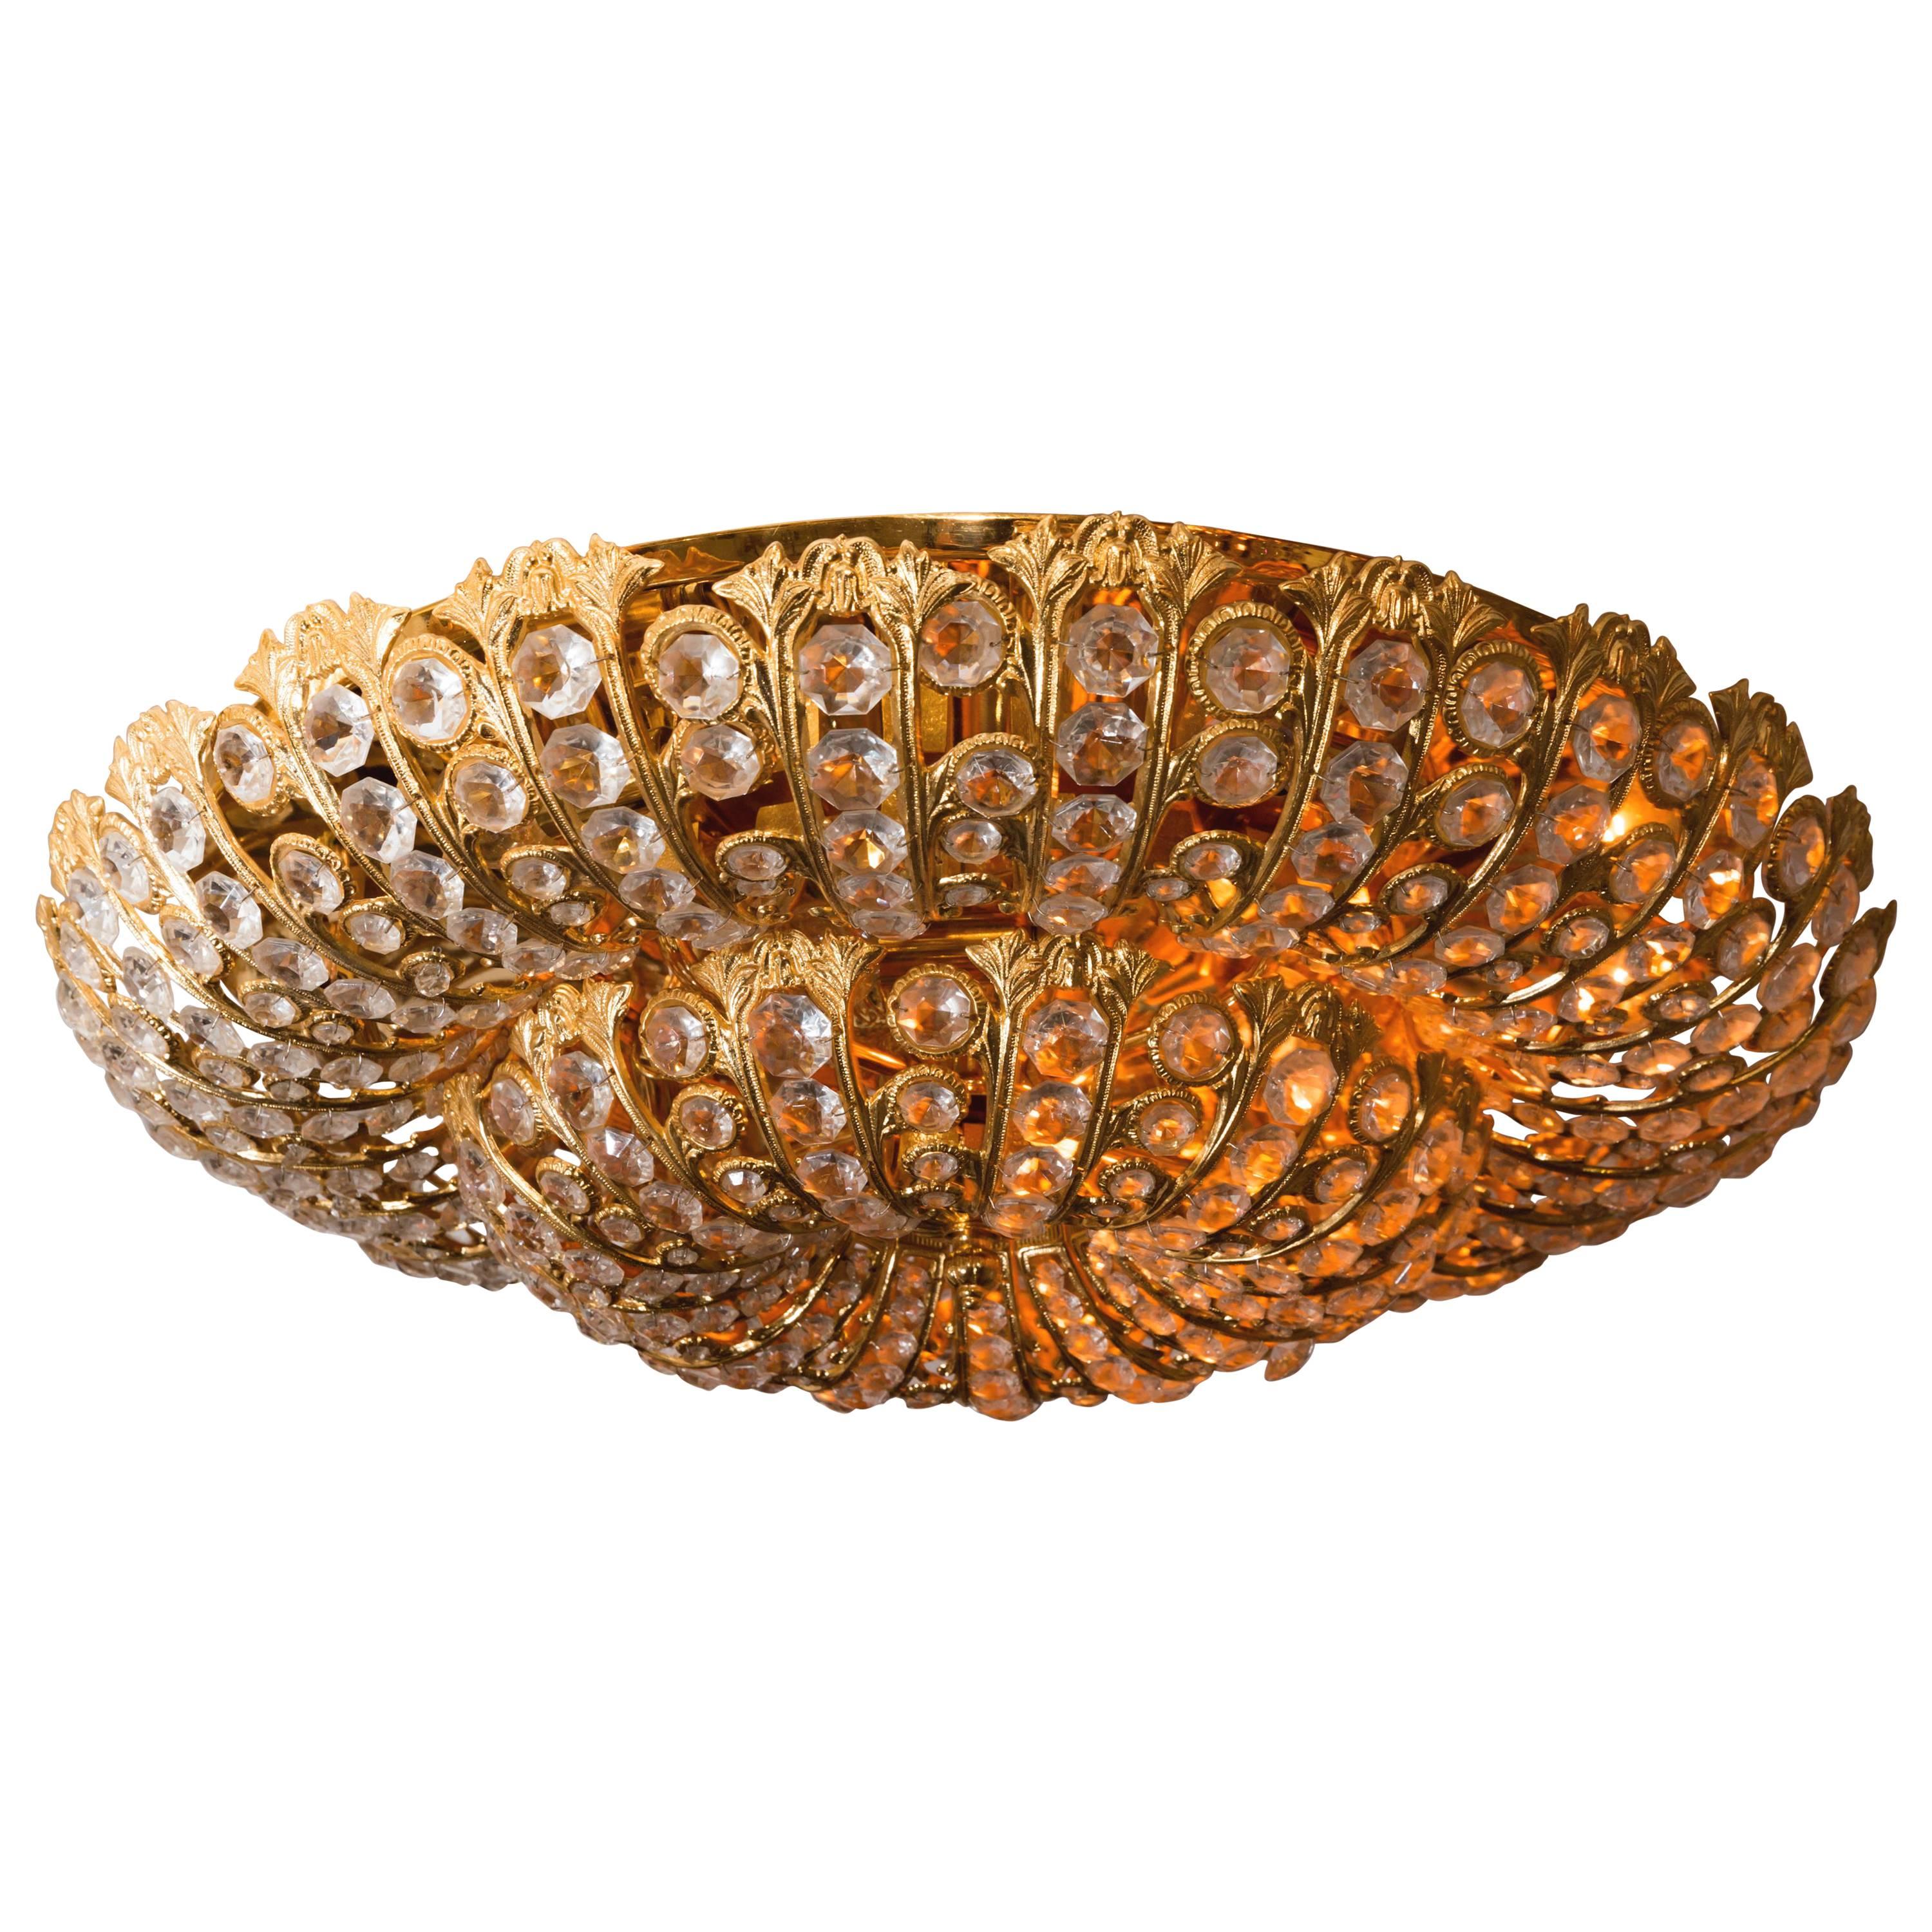 Dome Form Gilt Metal Flush Mount Fixture with Inset Crystal Elements